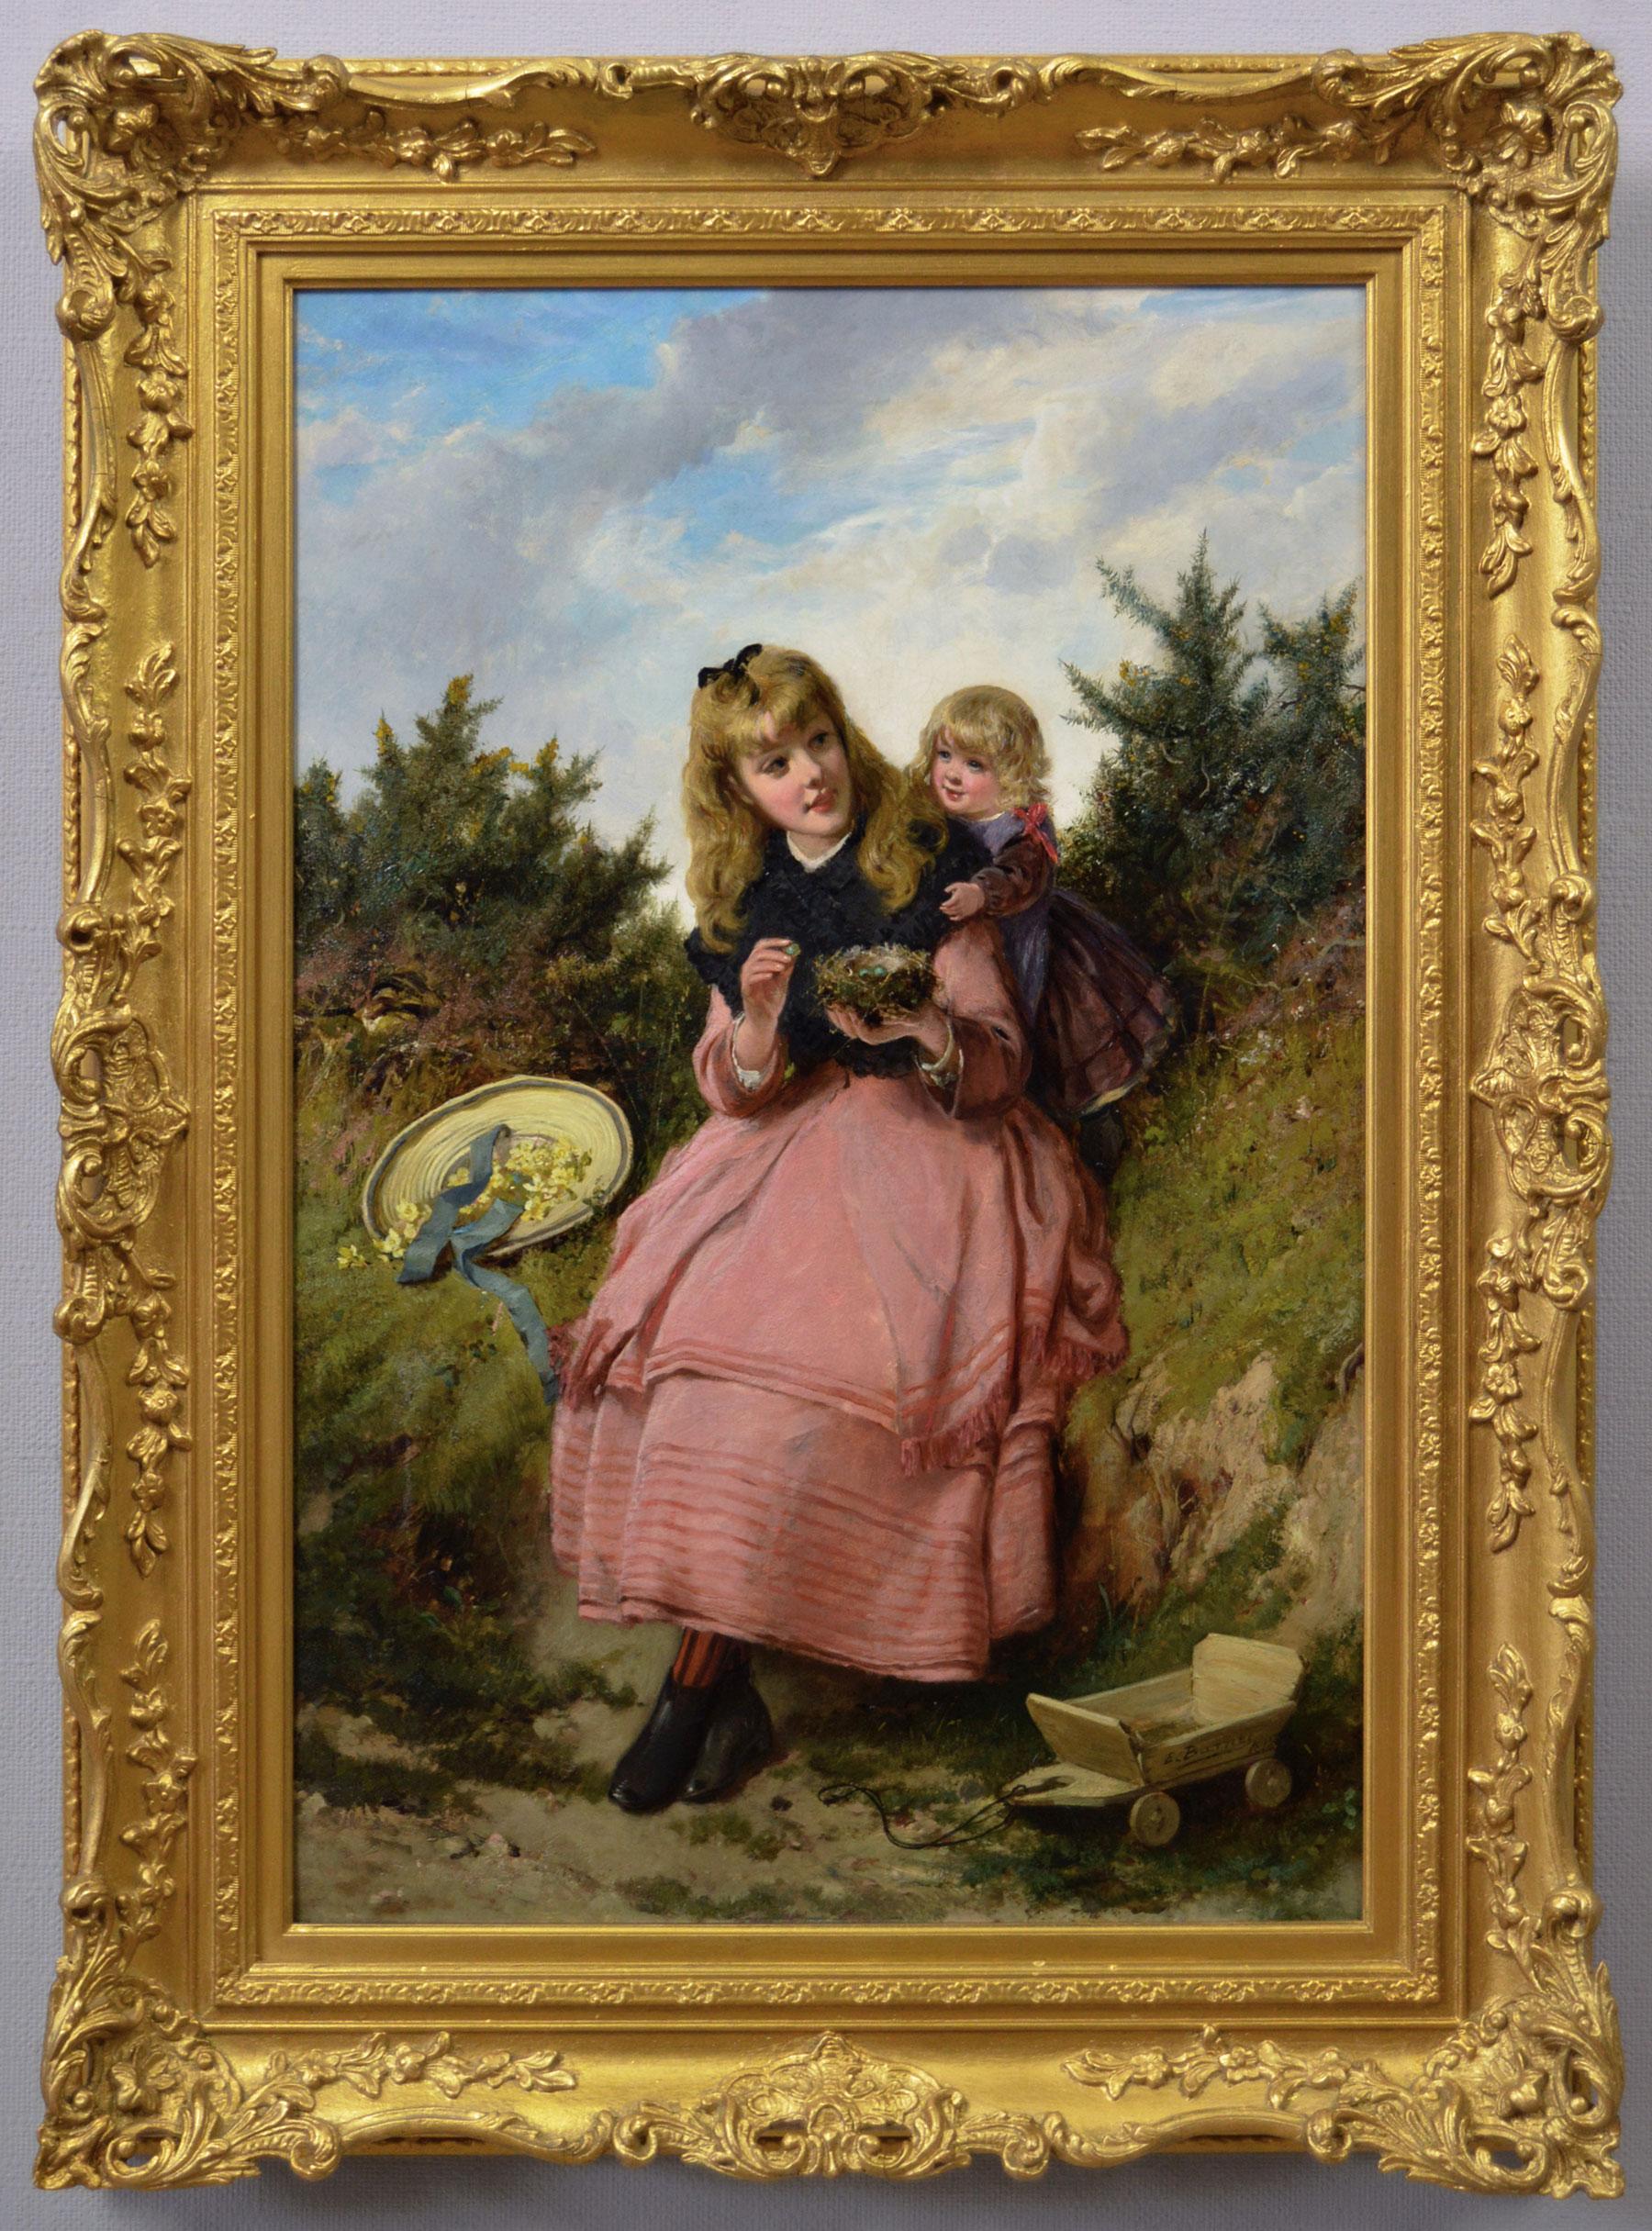 Edward Charles Barnes Portrait Painting - 19th Century genre oil painting of two girls with a bird’s nest